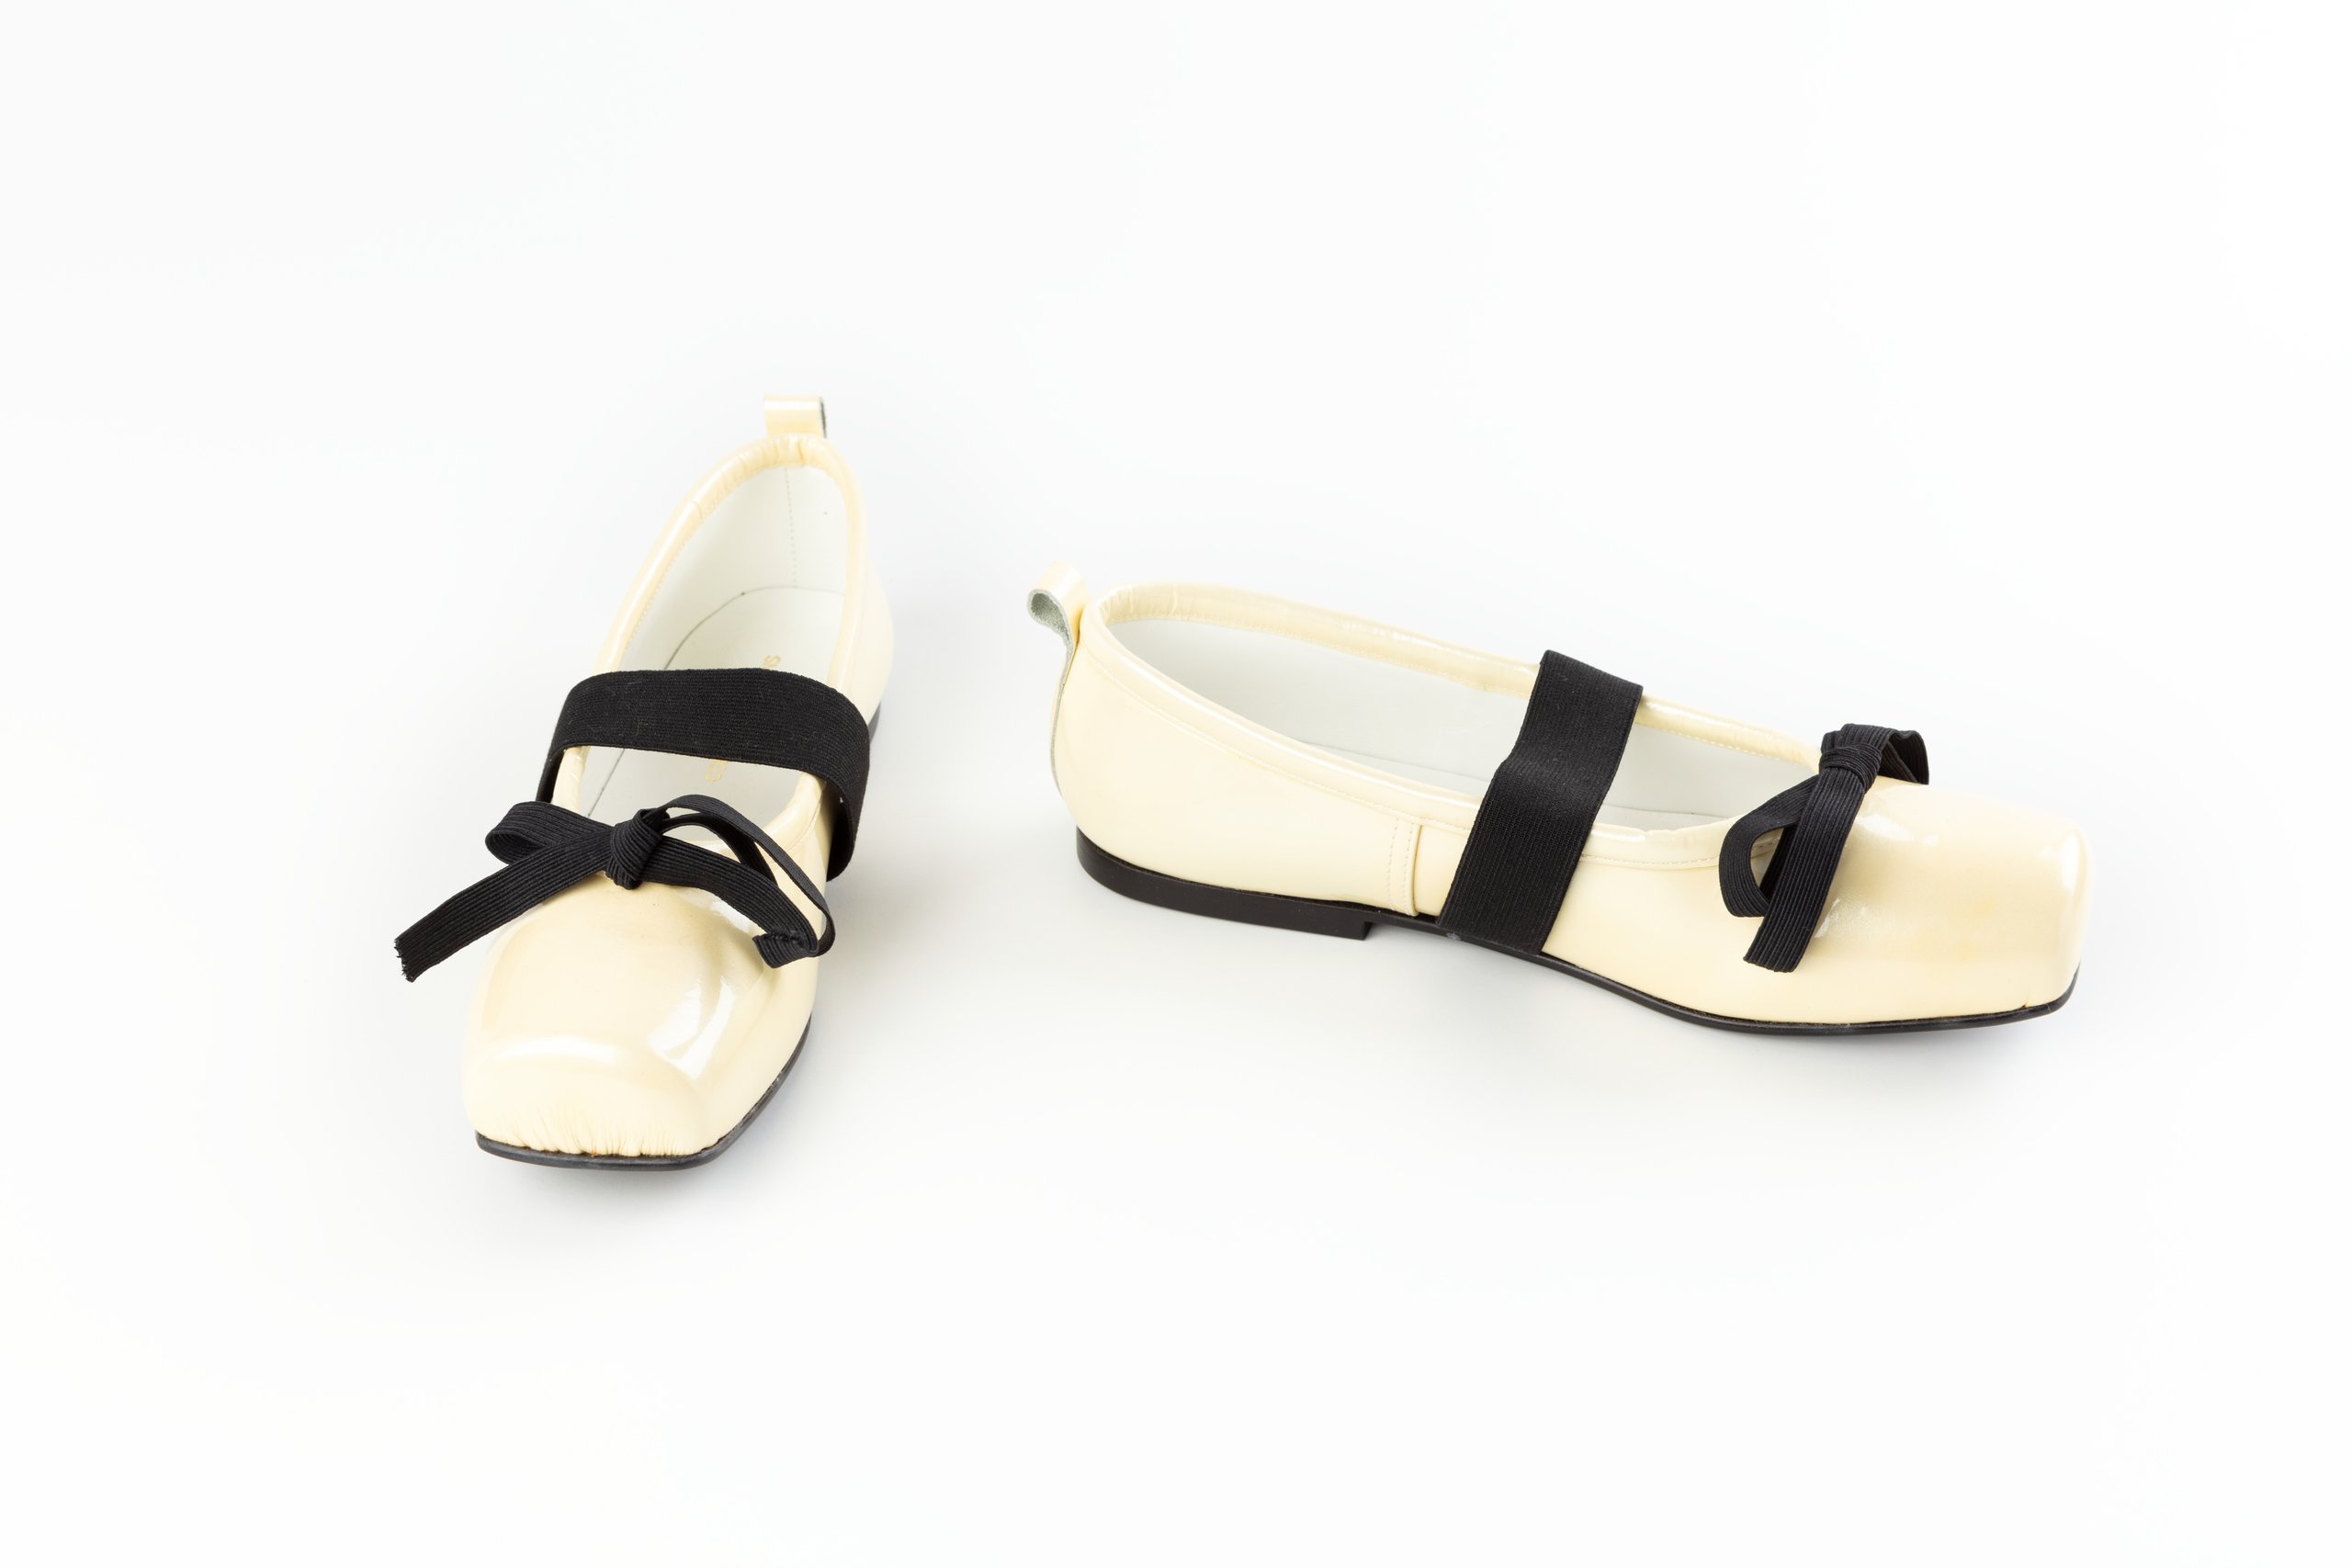 Pair of womens ballet slipper shoes by Rei Kawakubo for Comme des Garcons